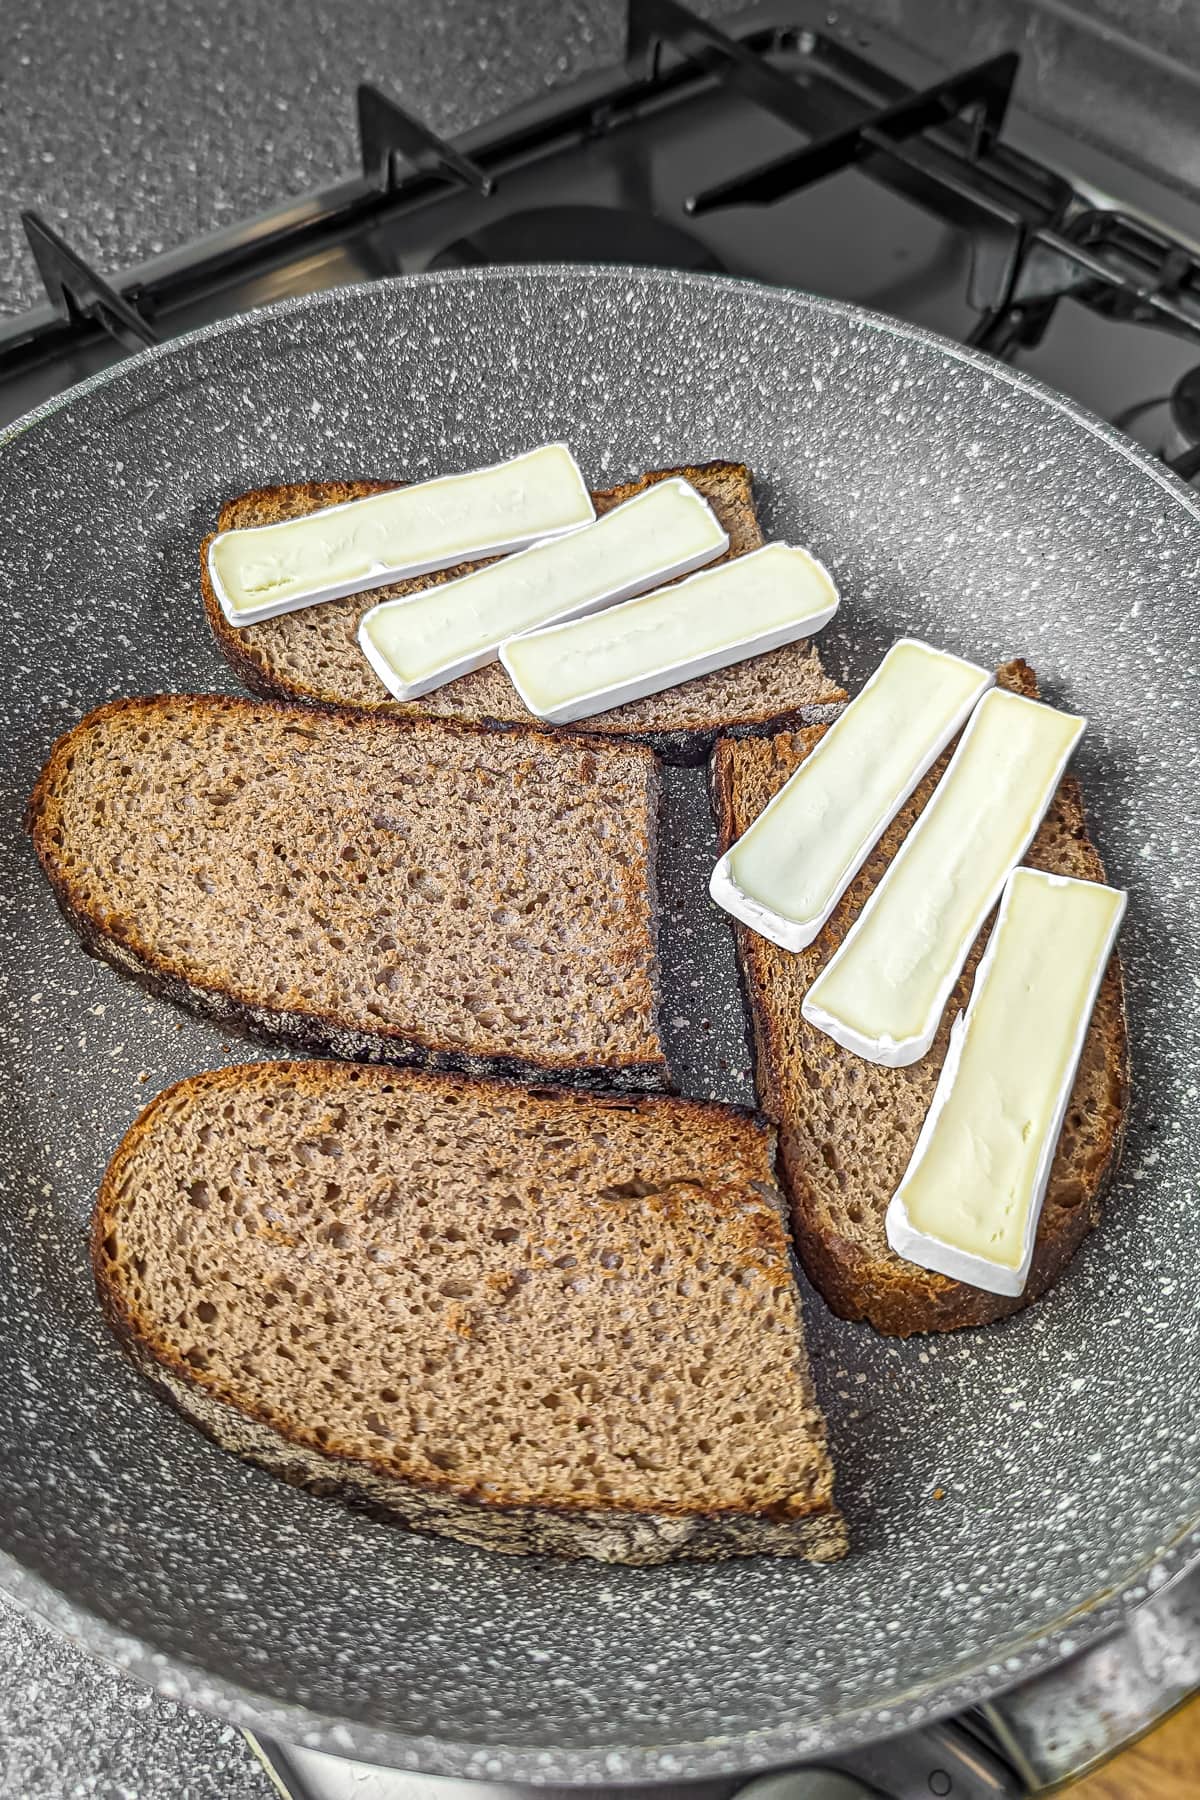 The buttered bread now topped with slices of white cheese in the frying pan.